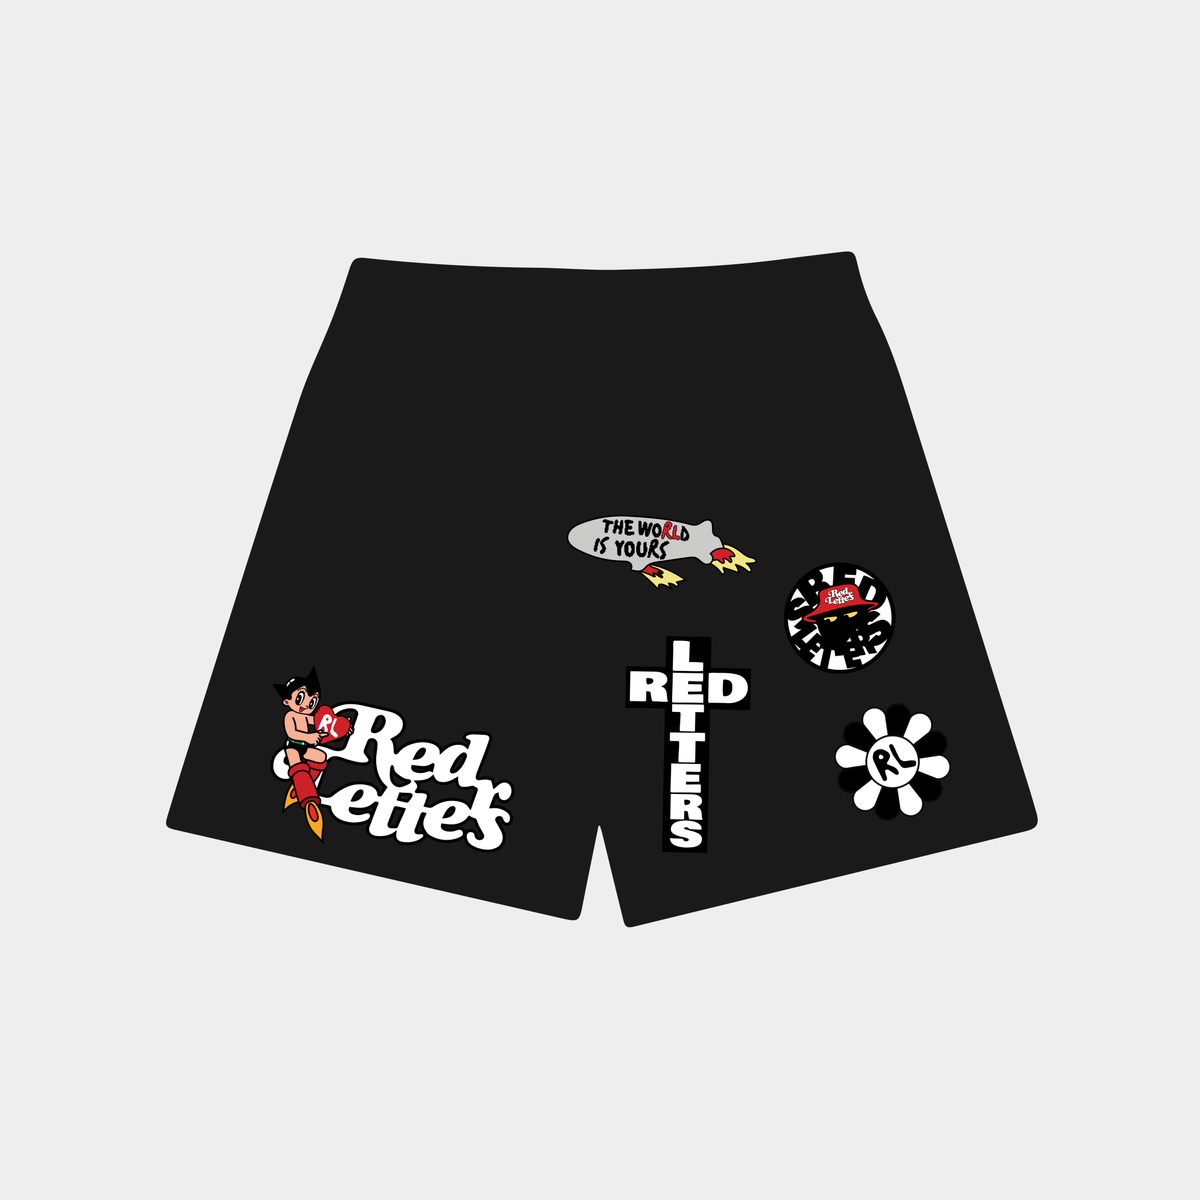 RL Patch Sweatshorts - RED LETTERS